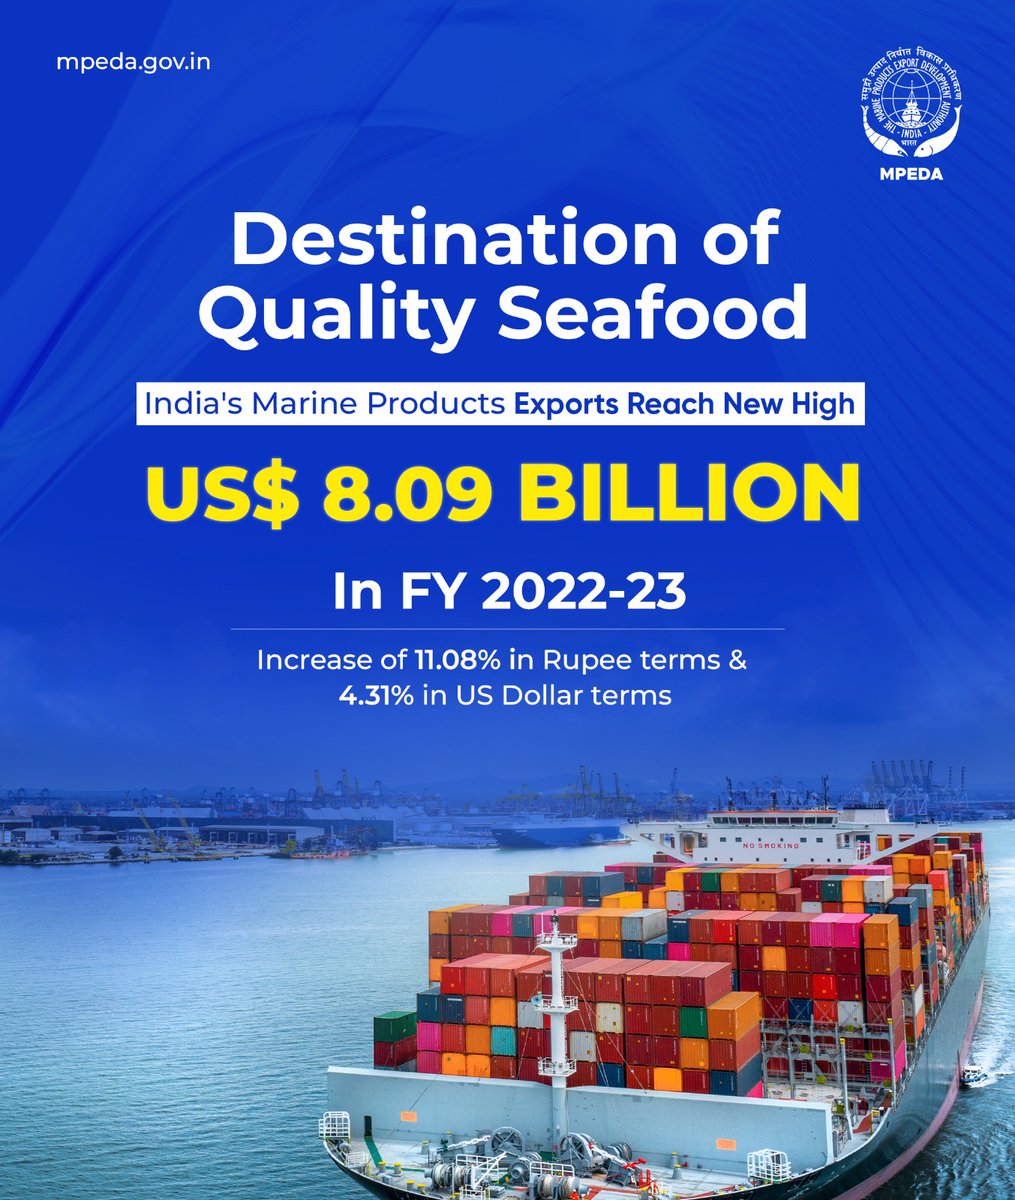 The destination of quality seafood 
India's marine products exports have witnessed a spike, surpassing all expectations and reaching a remarkable milestone of USD 8.09 billion during the FY 2022-23.
#MPEDA #seafood #exporters
@DoC_GoI @FisheriesGoI @Min_FAHD @MOFPI_GOI